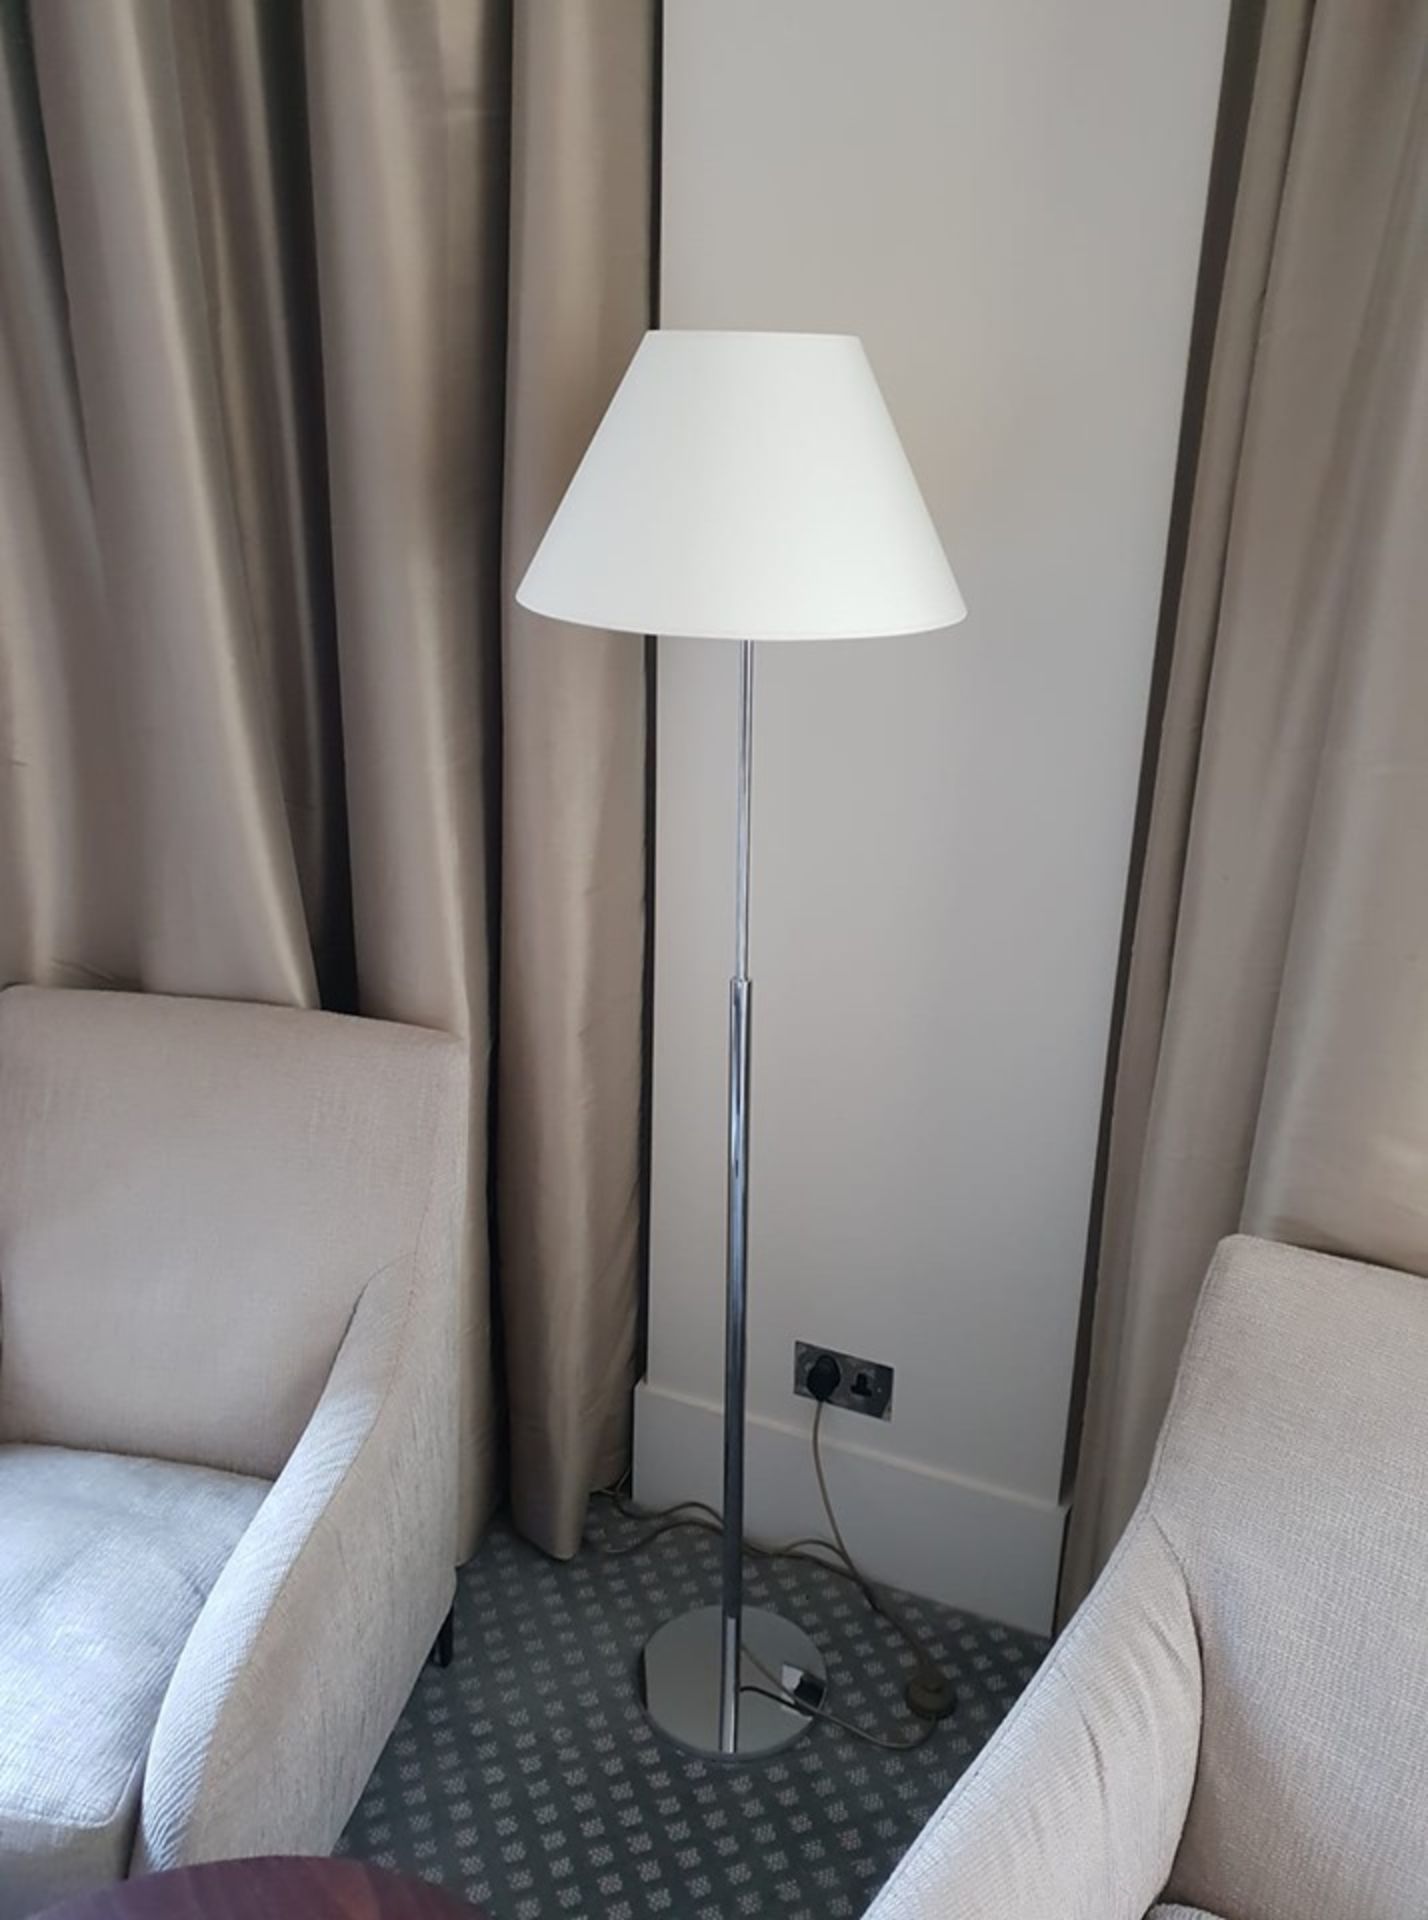 A Pair Of Contardi Italia Acfo Standard Floor Lamp Brushed Steel With Neutral Shade - The Lamp